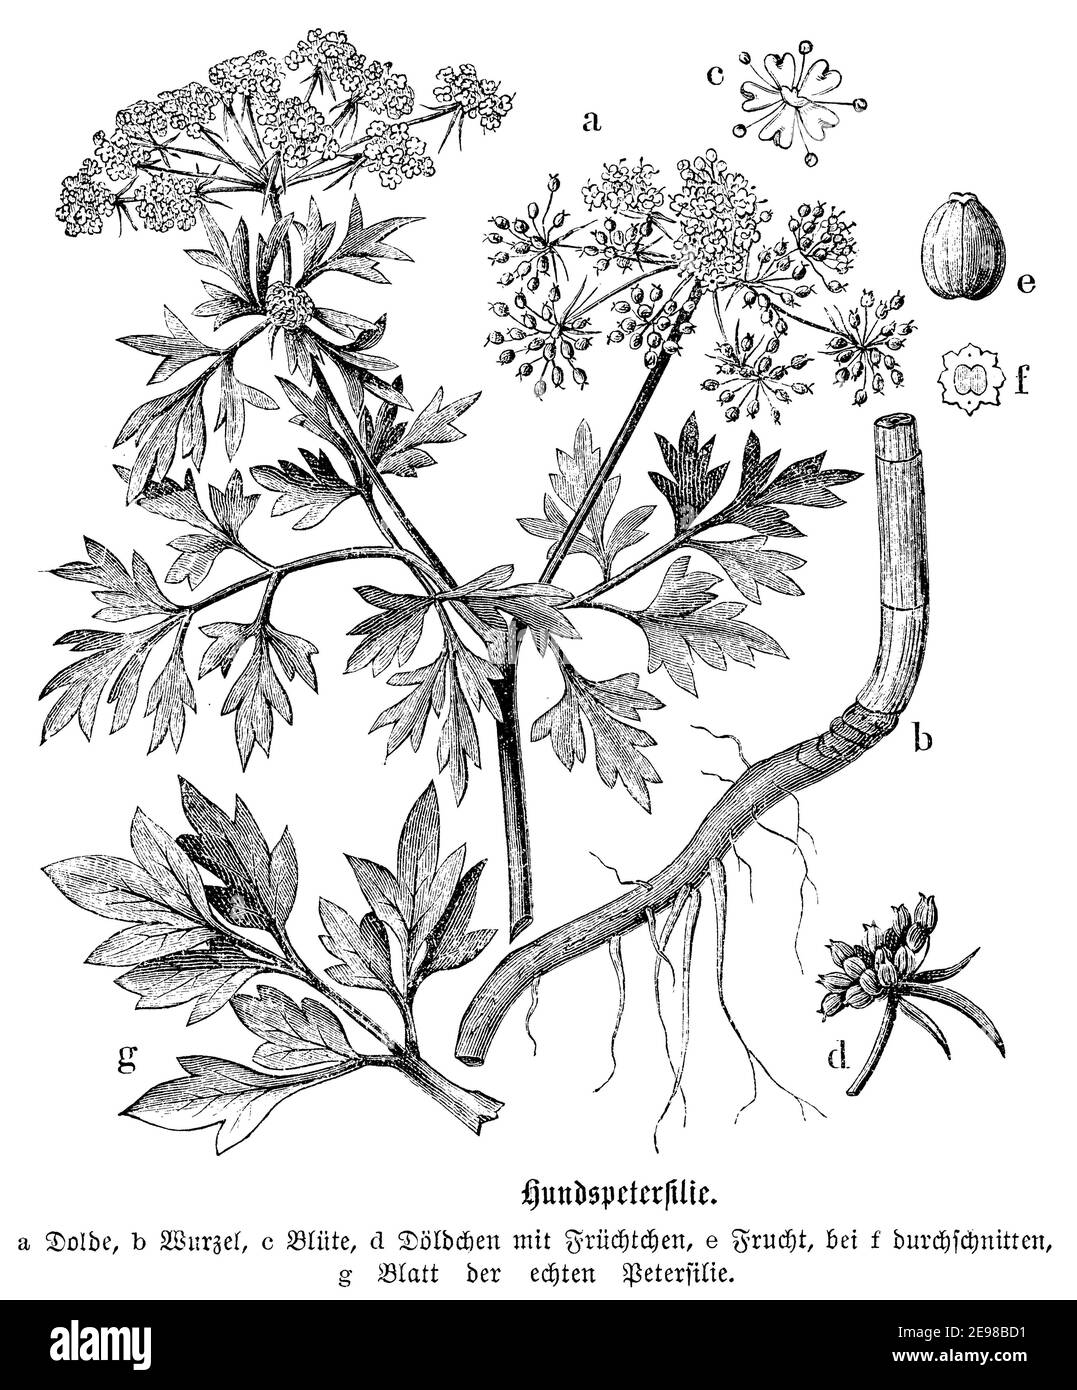 Narr's Petersilie, Narr's cicely, or poison Petersilie / Aethusa cynapium / Hundspetersilie (Botanik Buch, 1880) Stockfoto